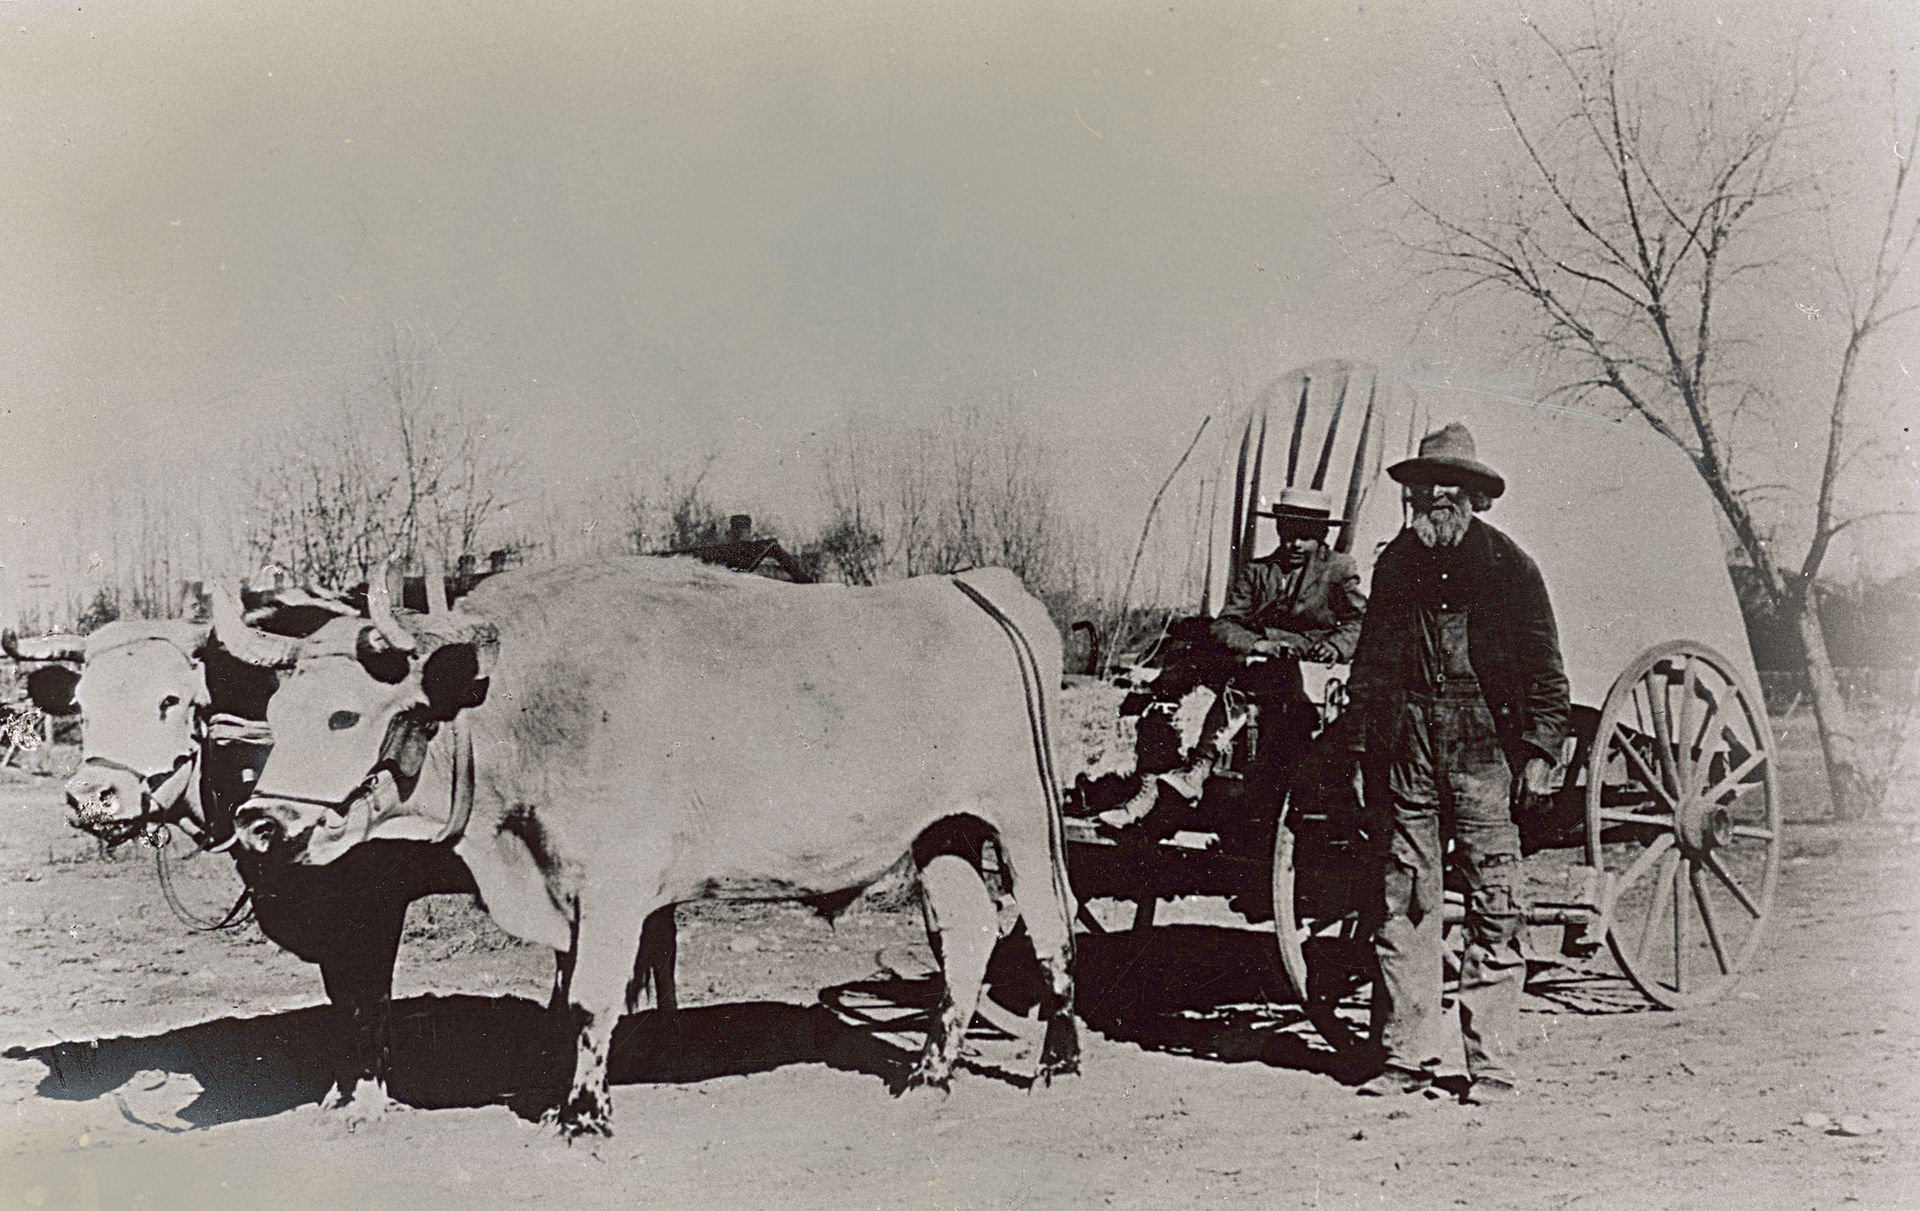 A historical photograph showing a team of oxen pulling a small covered wagon.